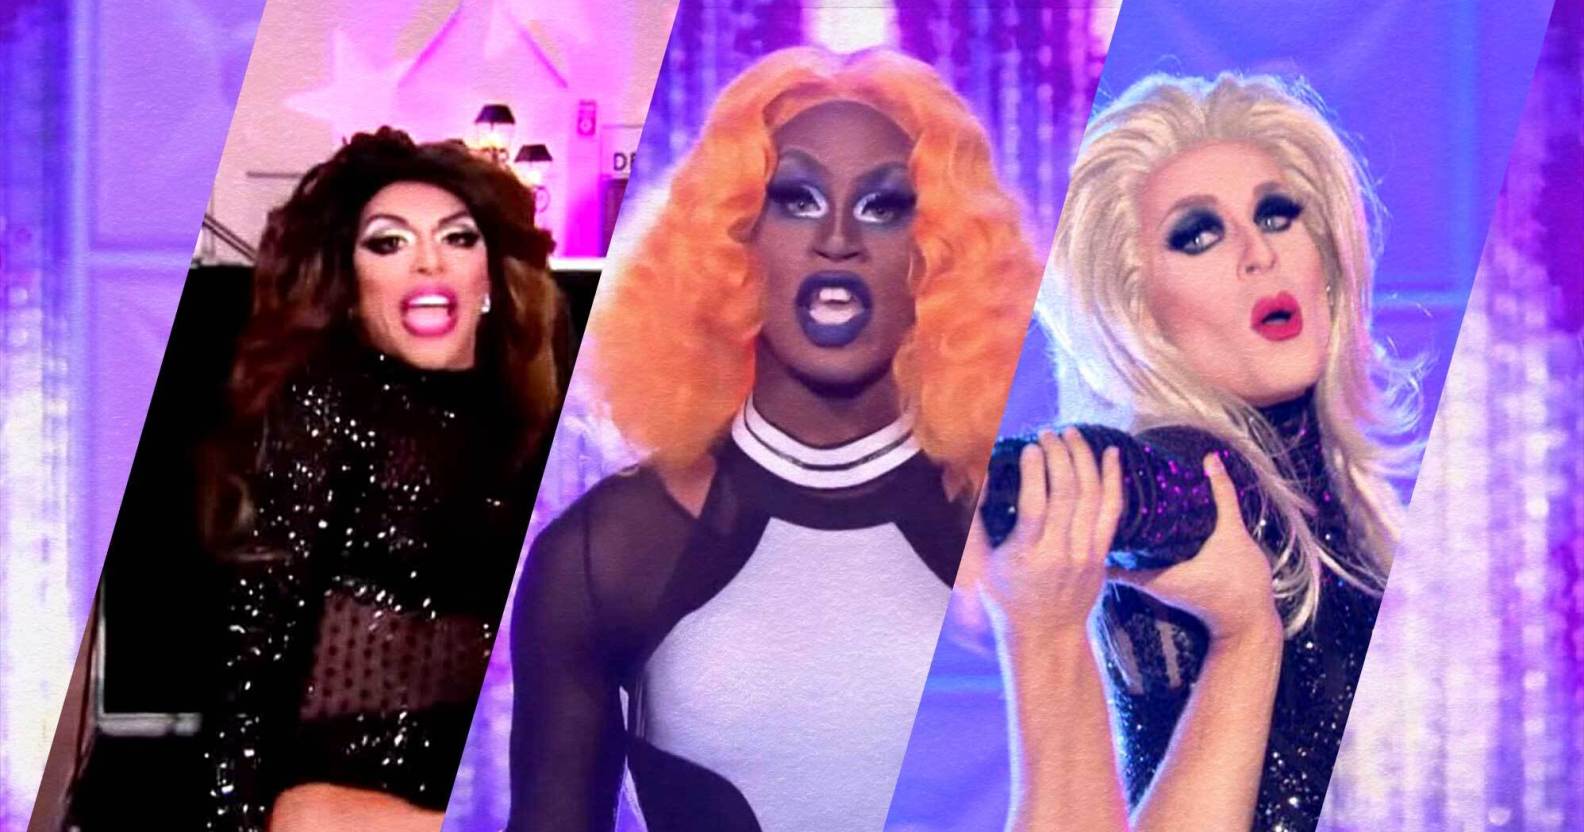 Every RuPaul's Drag Race finale cast remix, ranked